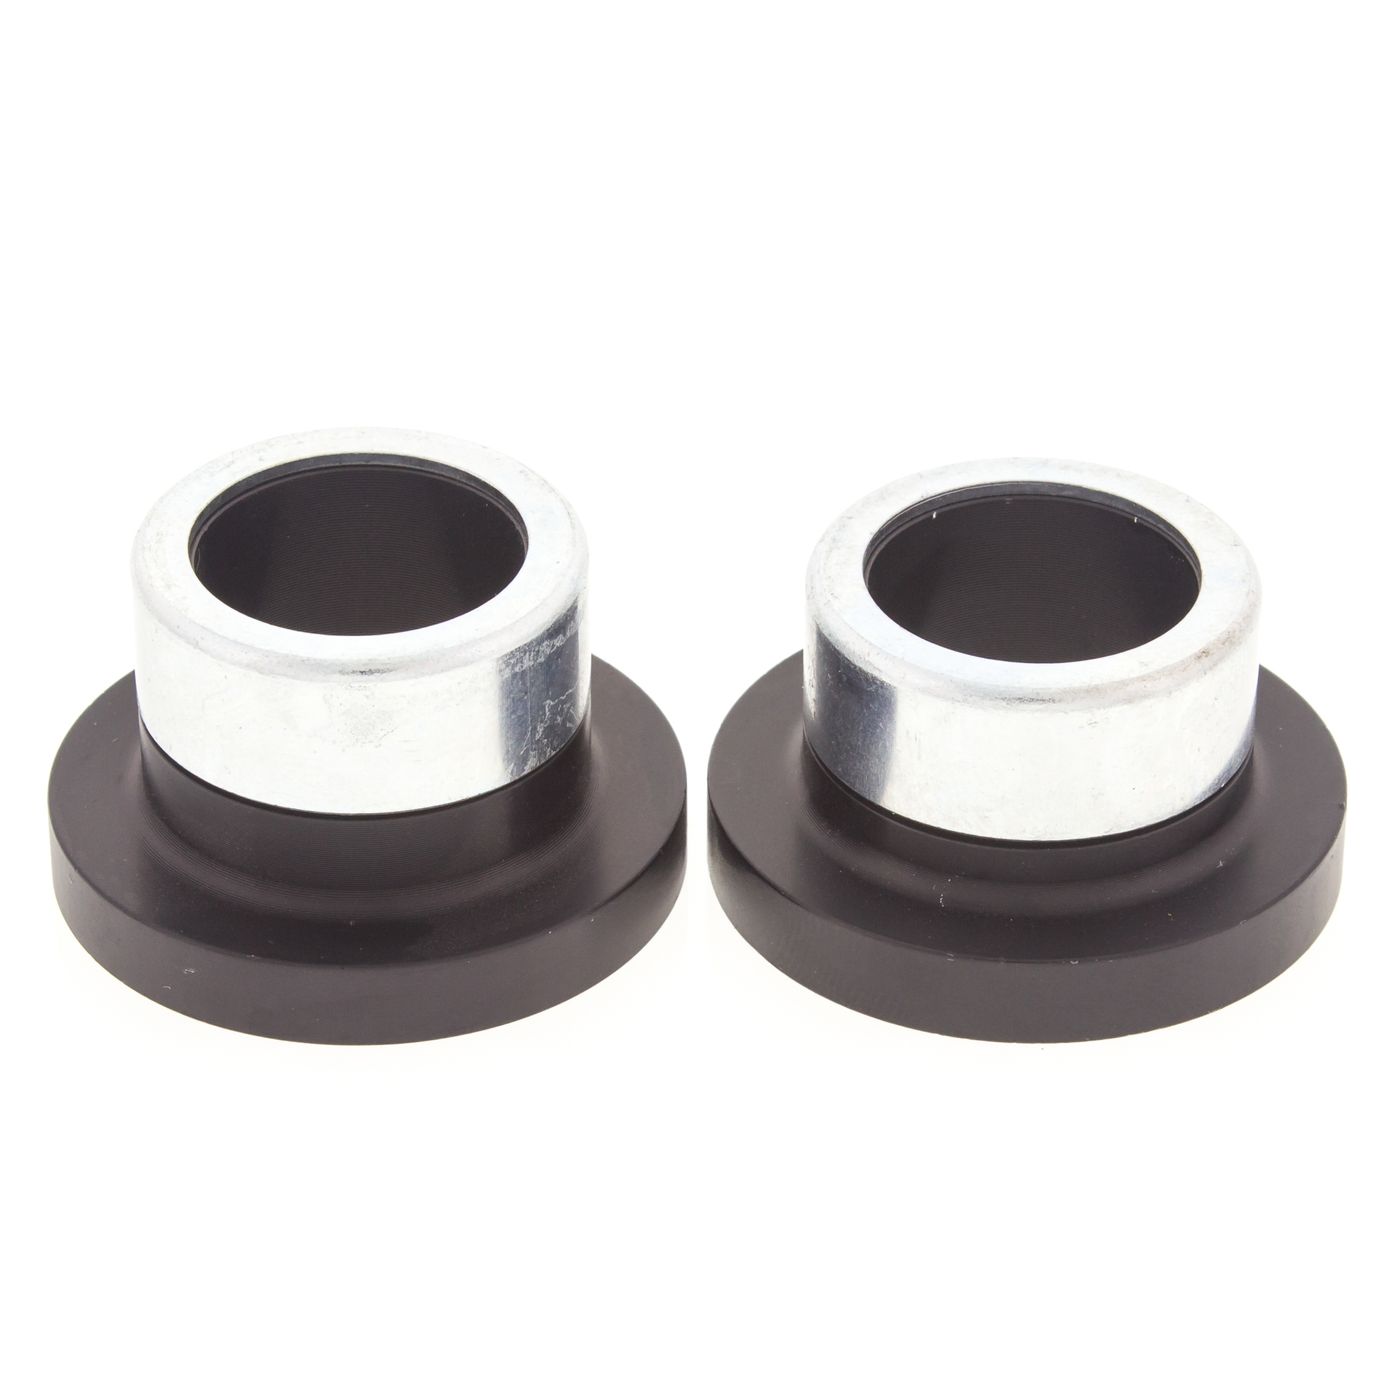 Wrp Rear Wheel Spacer Kits - WRP111079-1 image